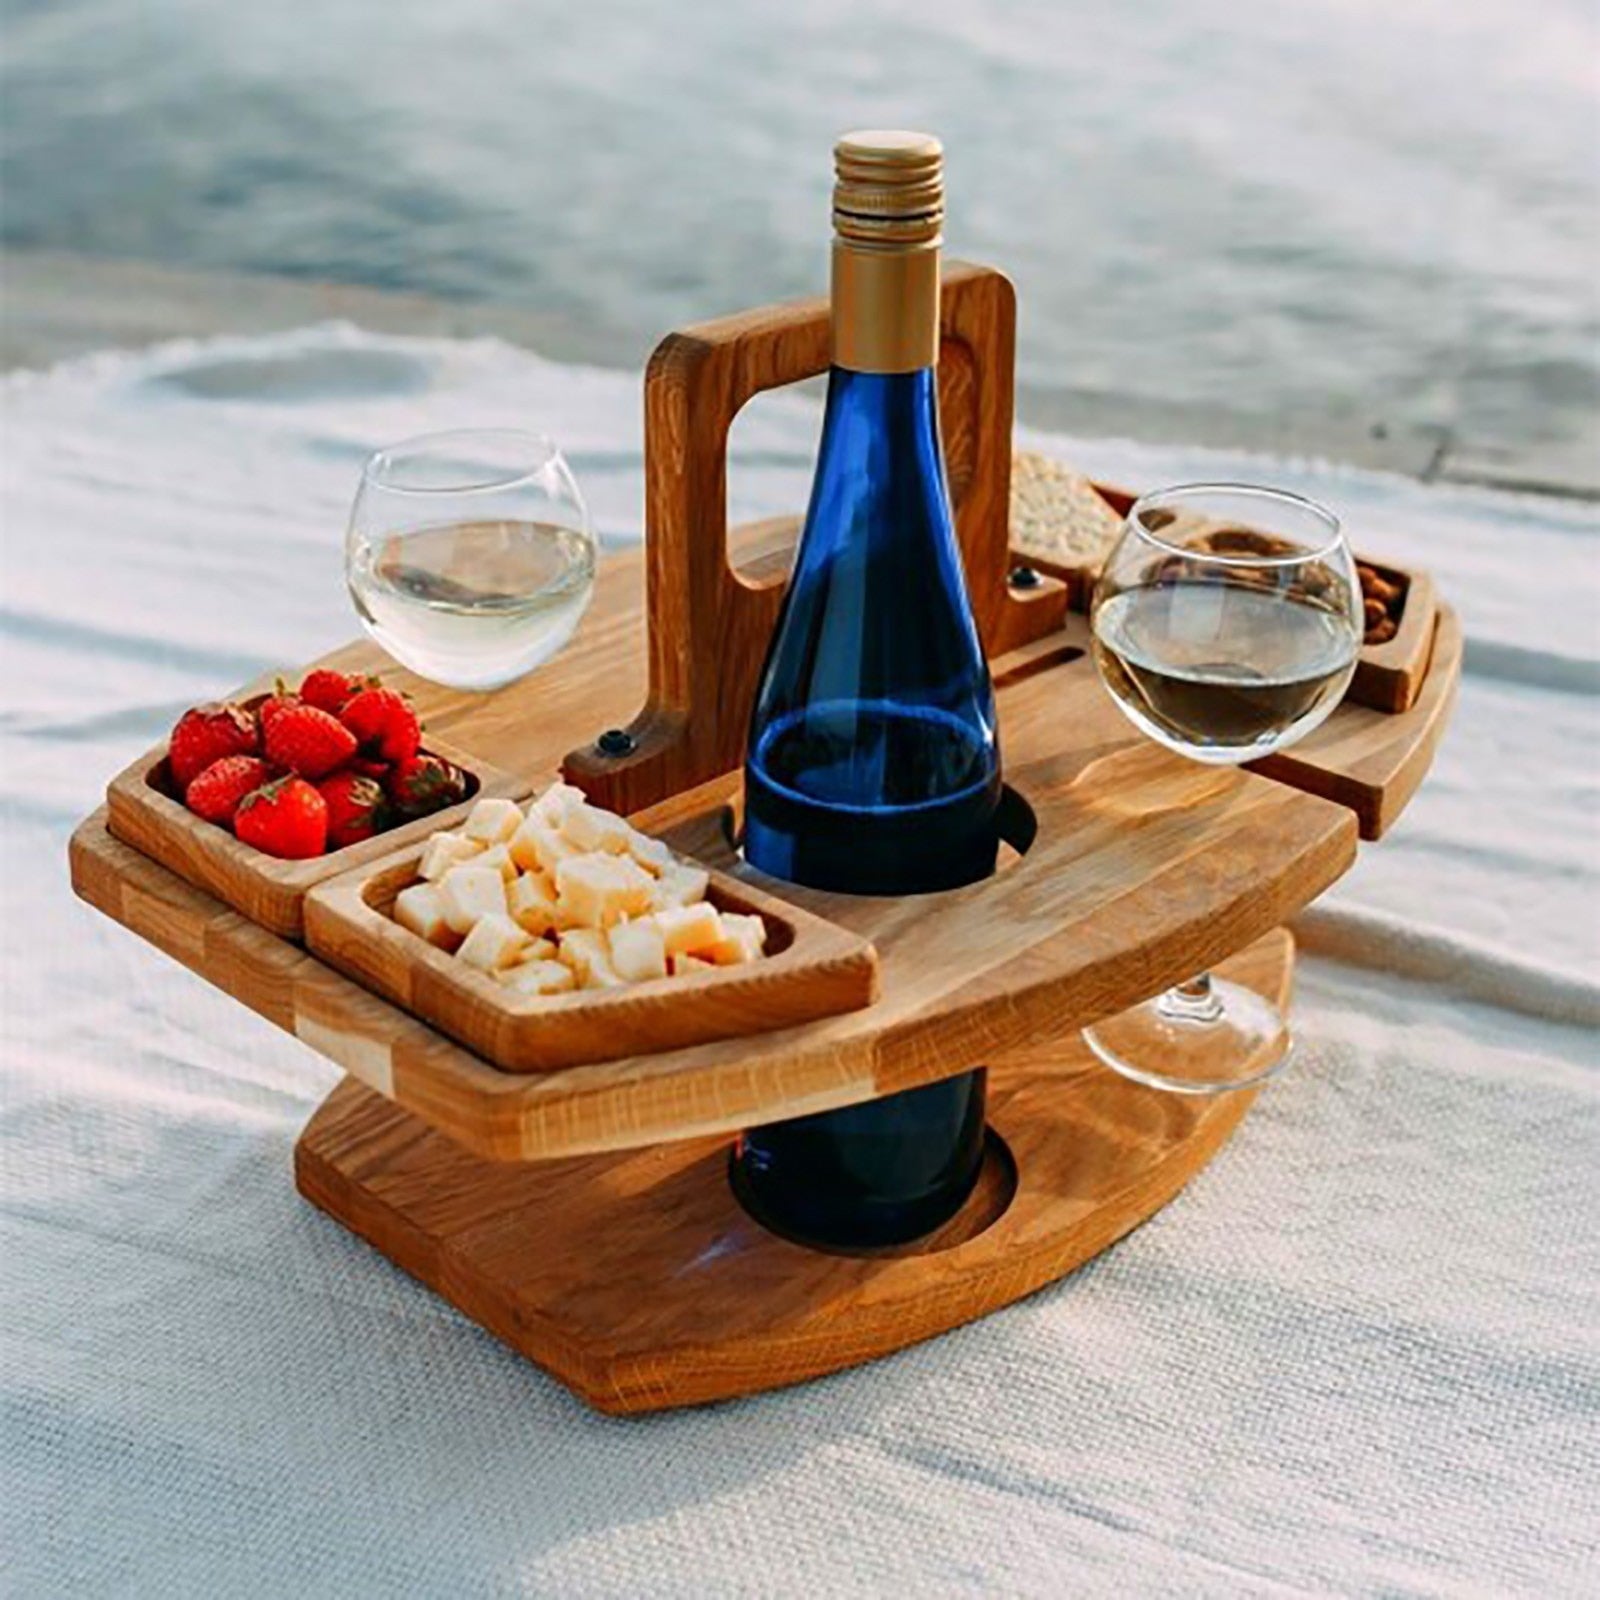 for Outdoor Garden Travel Beach Small Round Picnic Camping Table QOTSTEOS Outdoor Wine Table Wooden size:30x24cm Folding Picnic Table Travel Portable